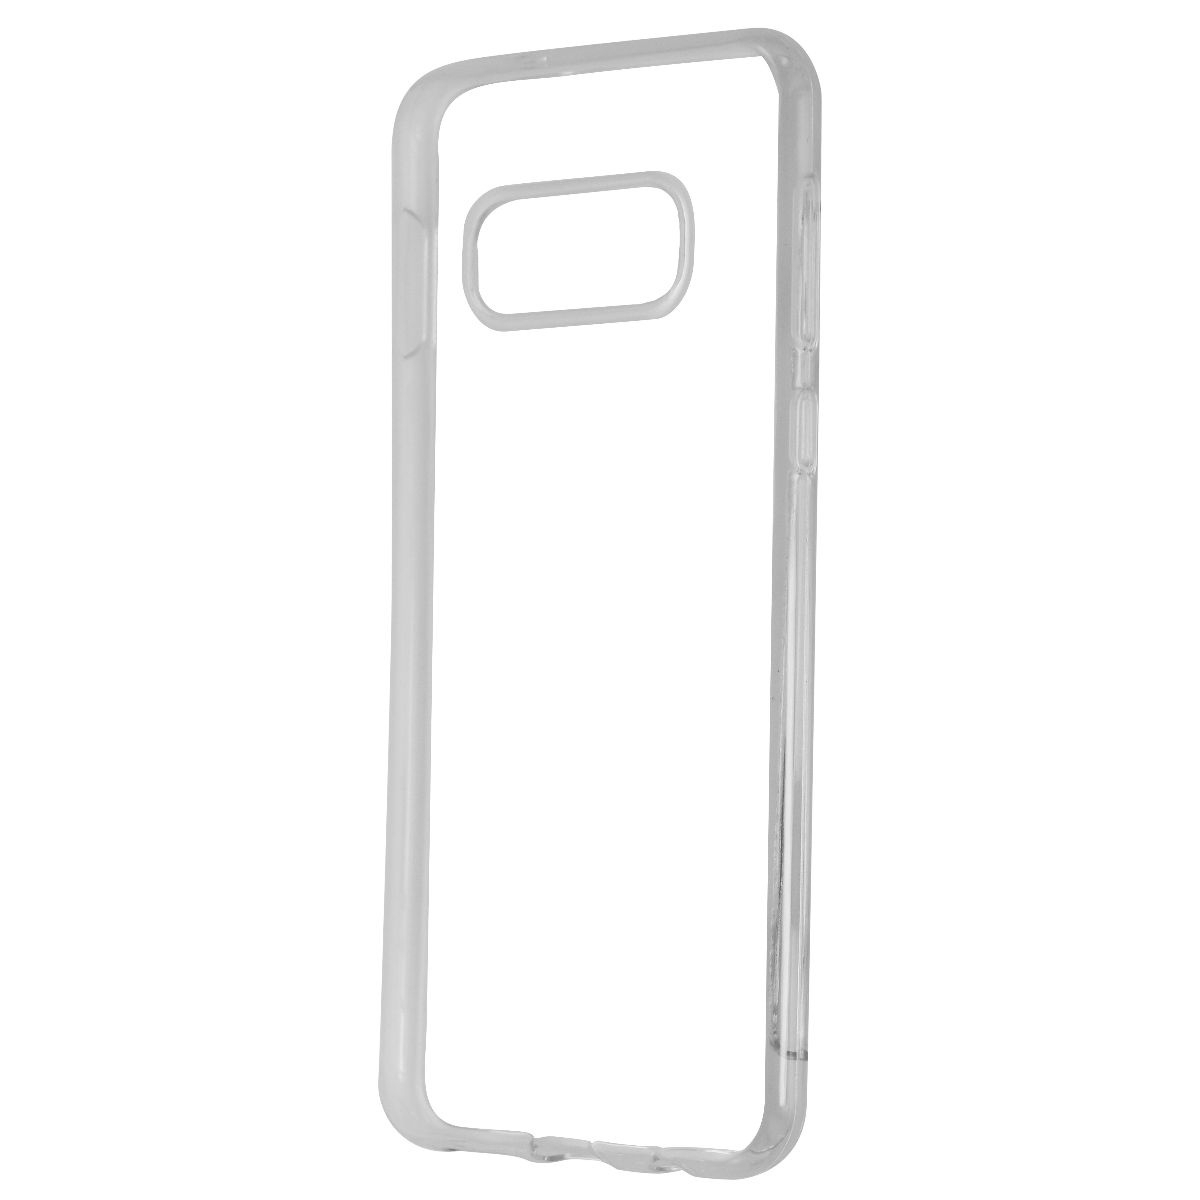 Key Soft Case Series Case For Samsung Galaxy S10e - Clear